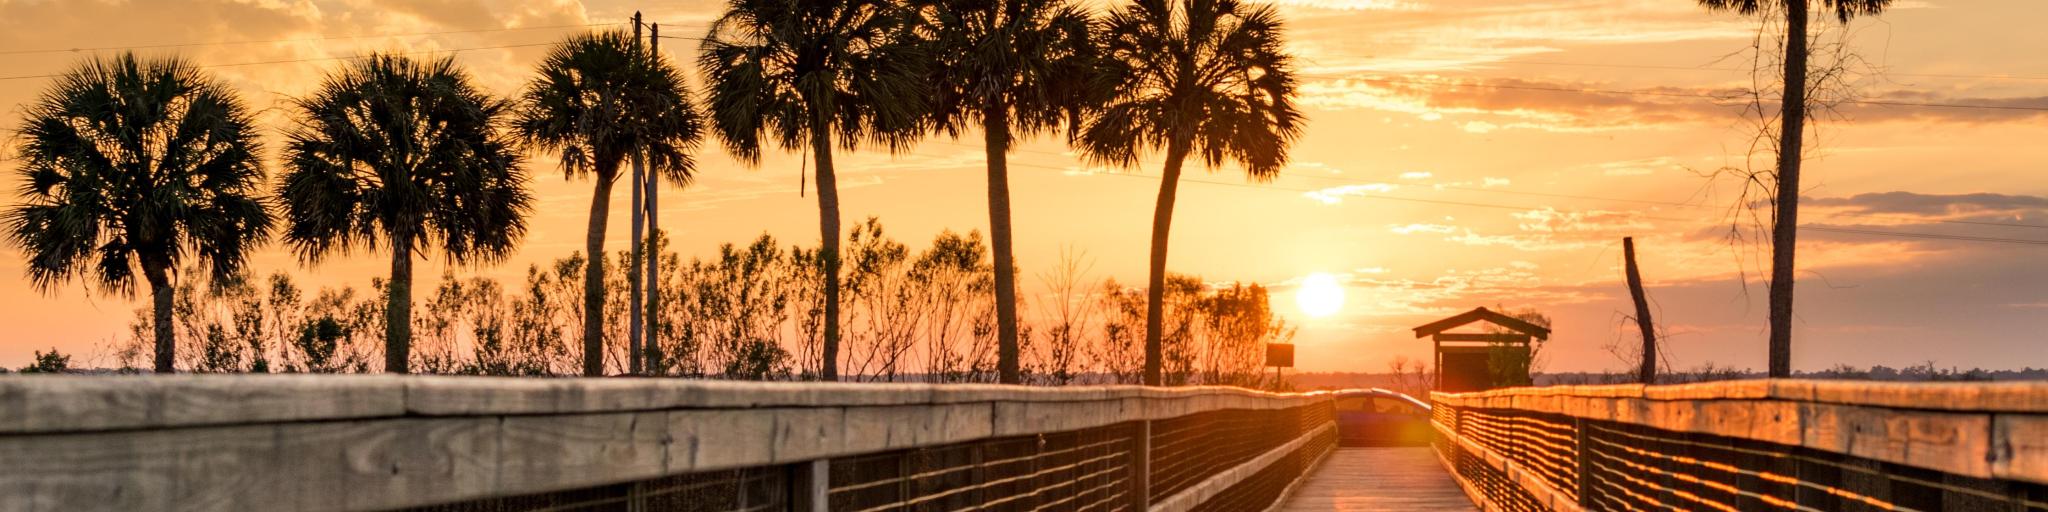 Gainesville florida at sunset with a Boardwalk over the water leading to the distance and palm trees silhouetted against the setting sun.